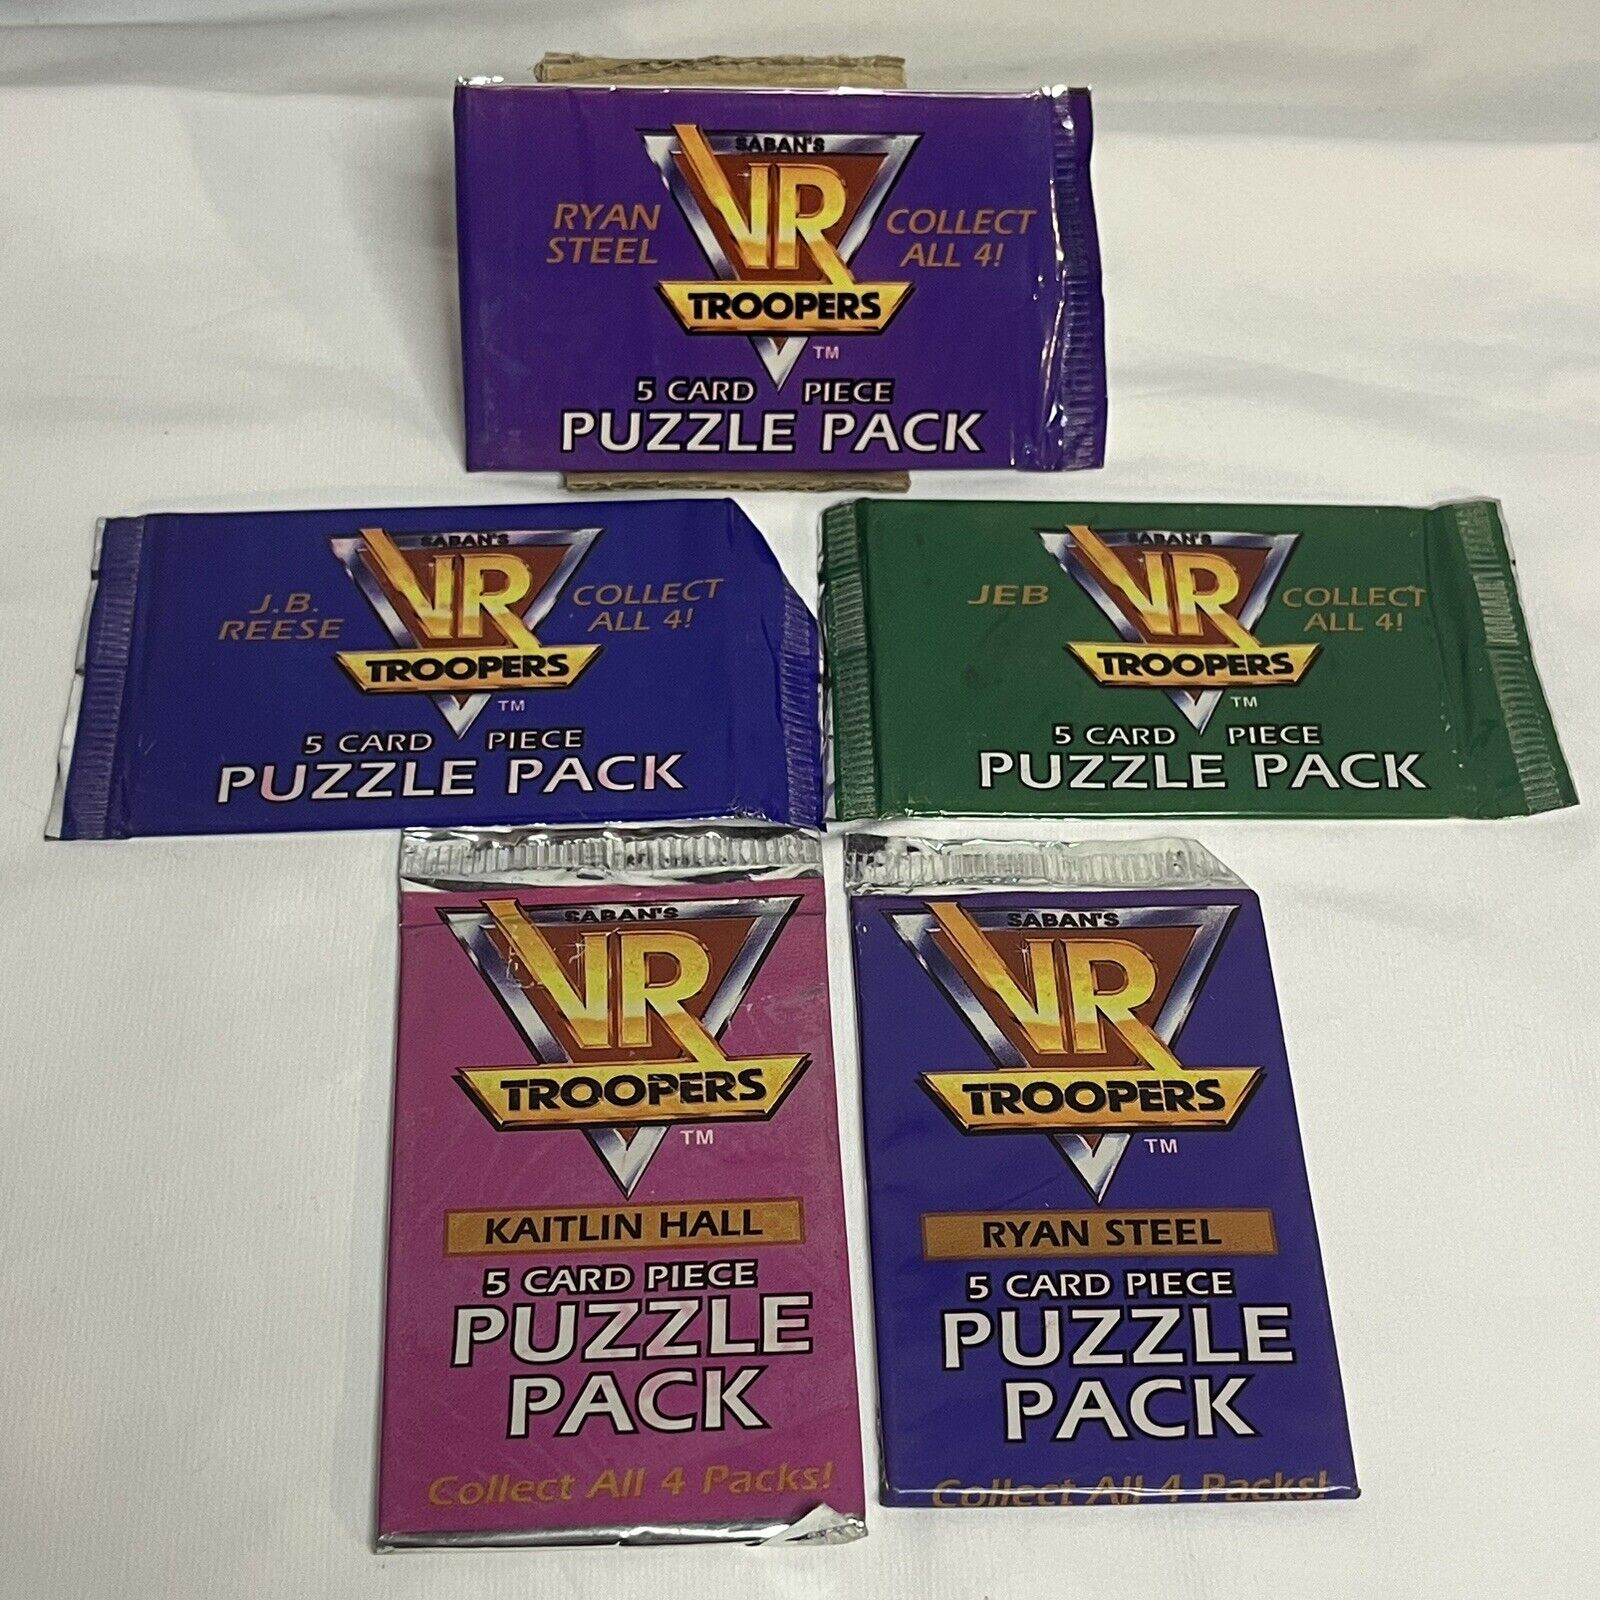 LOT OF 5 - VR Troopers Trading Cards Puzzle Pack - 5 Cards Per Pack - Mix - NEW